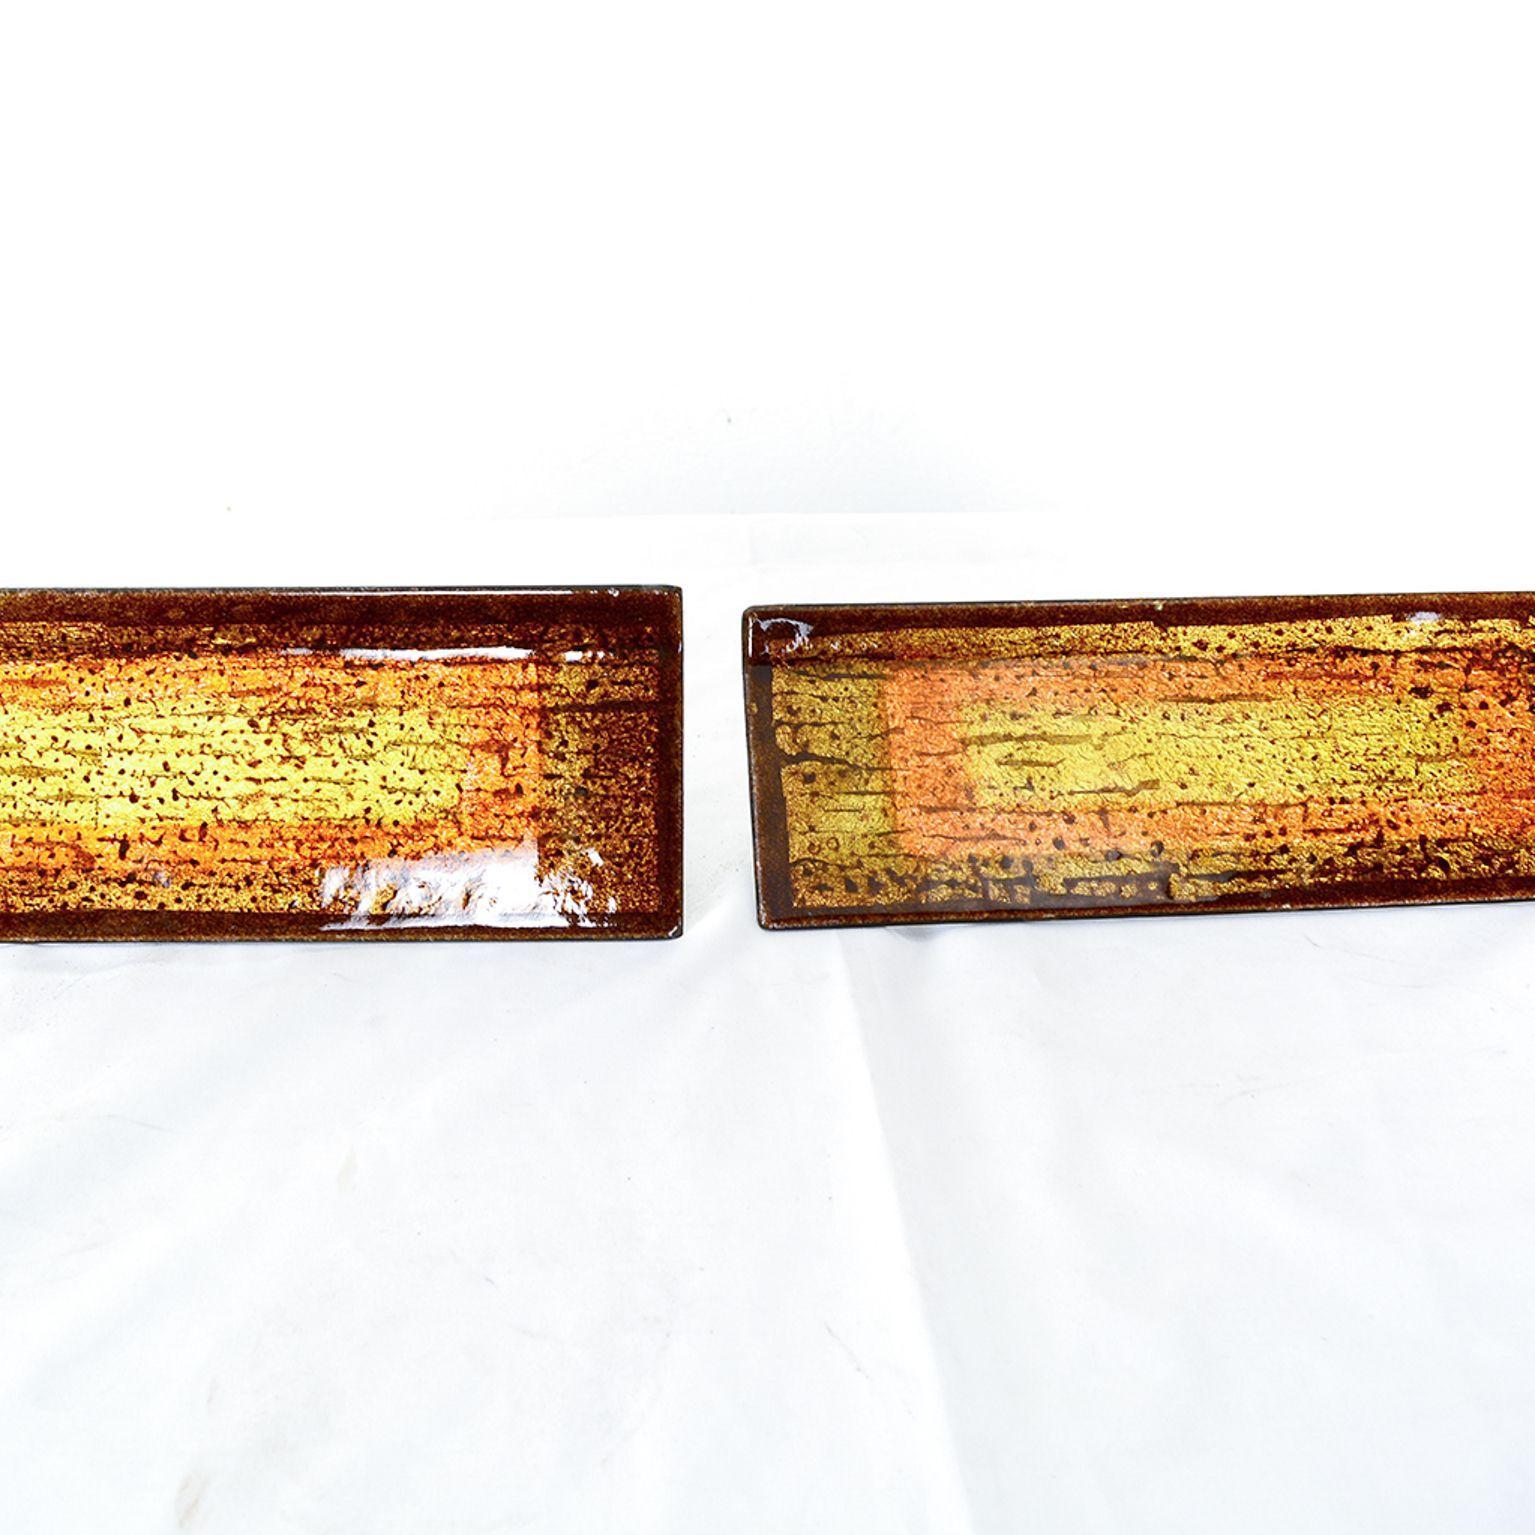 For your consideration: Mid-Century Modern Incredible Italian glass door handles copper enamel Art Studio Del Campo 1960s Torino Italy

Dimensions: 12 x 12 x 6

Original vintage condition, enamel front in good condition. Black back plate shows signs